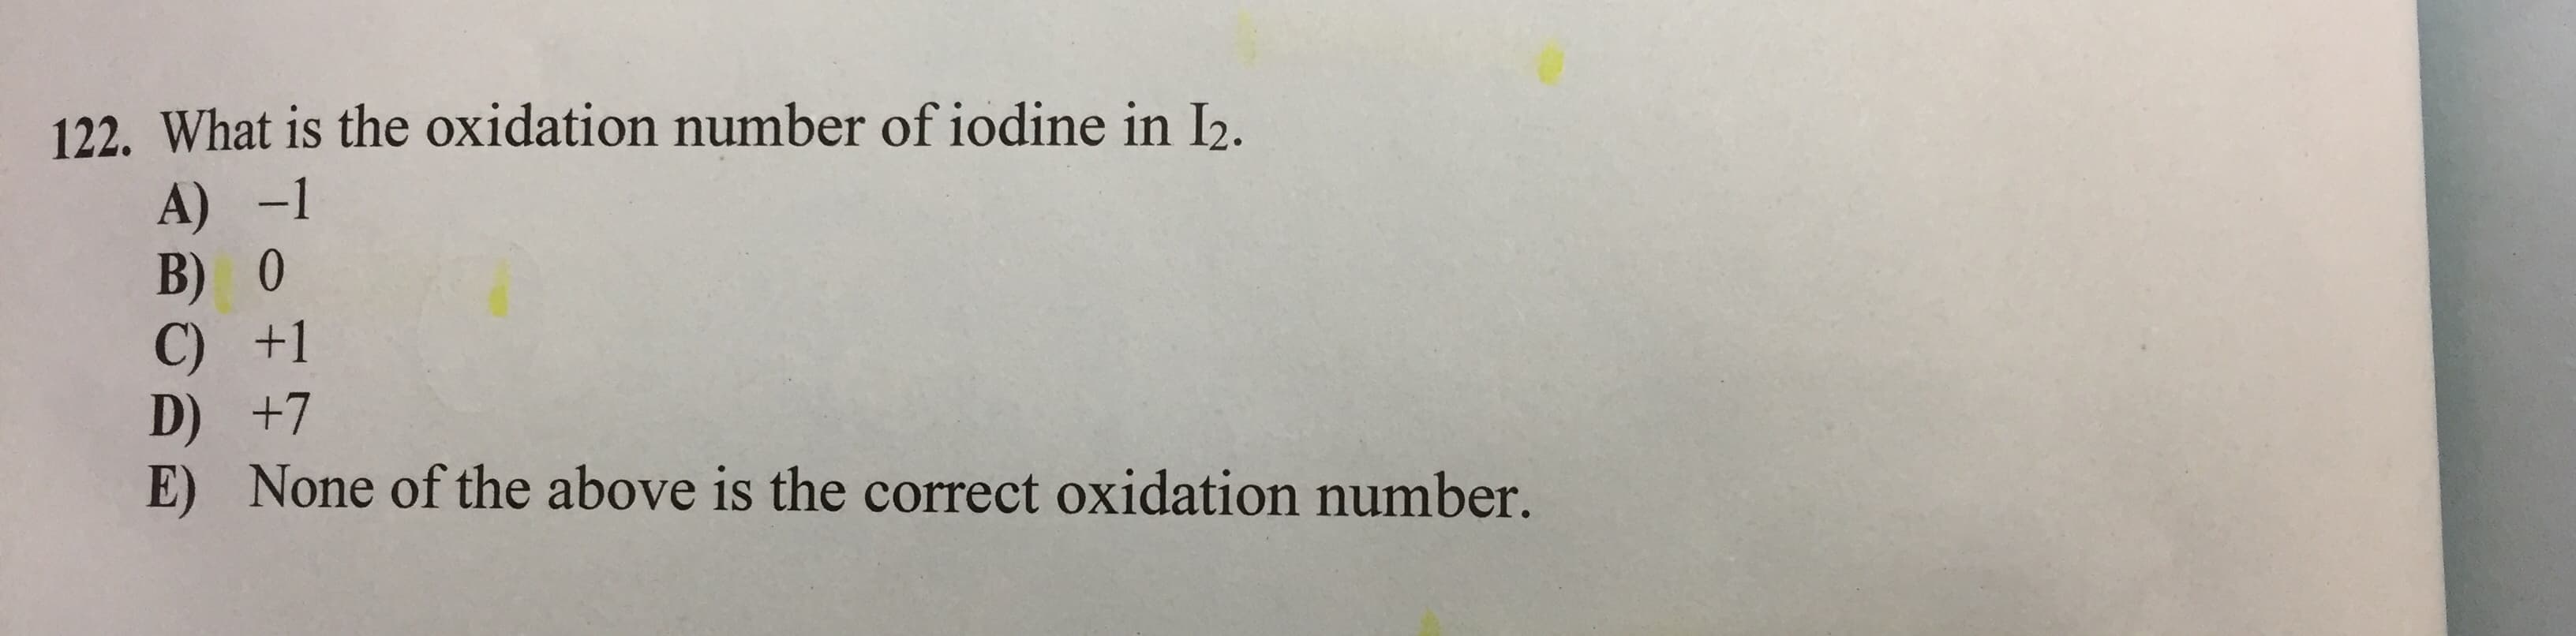 122. What is the oxidation number of iodine in I2.
A) -1
B) 0
C) +1
D) +7
E) None of the above is the correct oxidation number.
